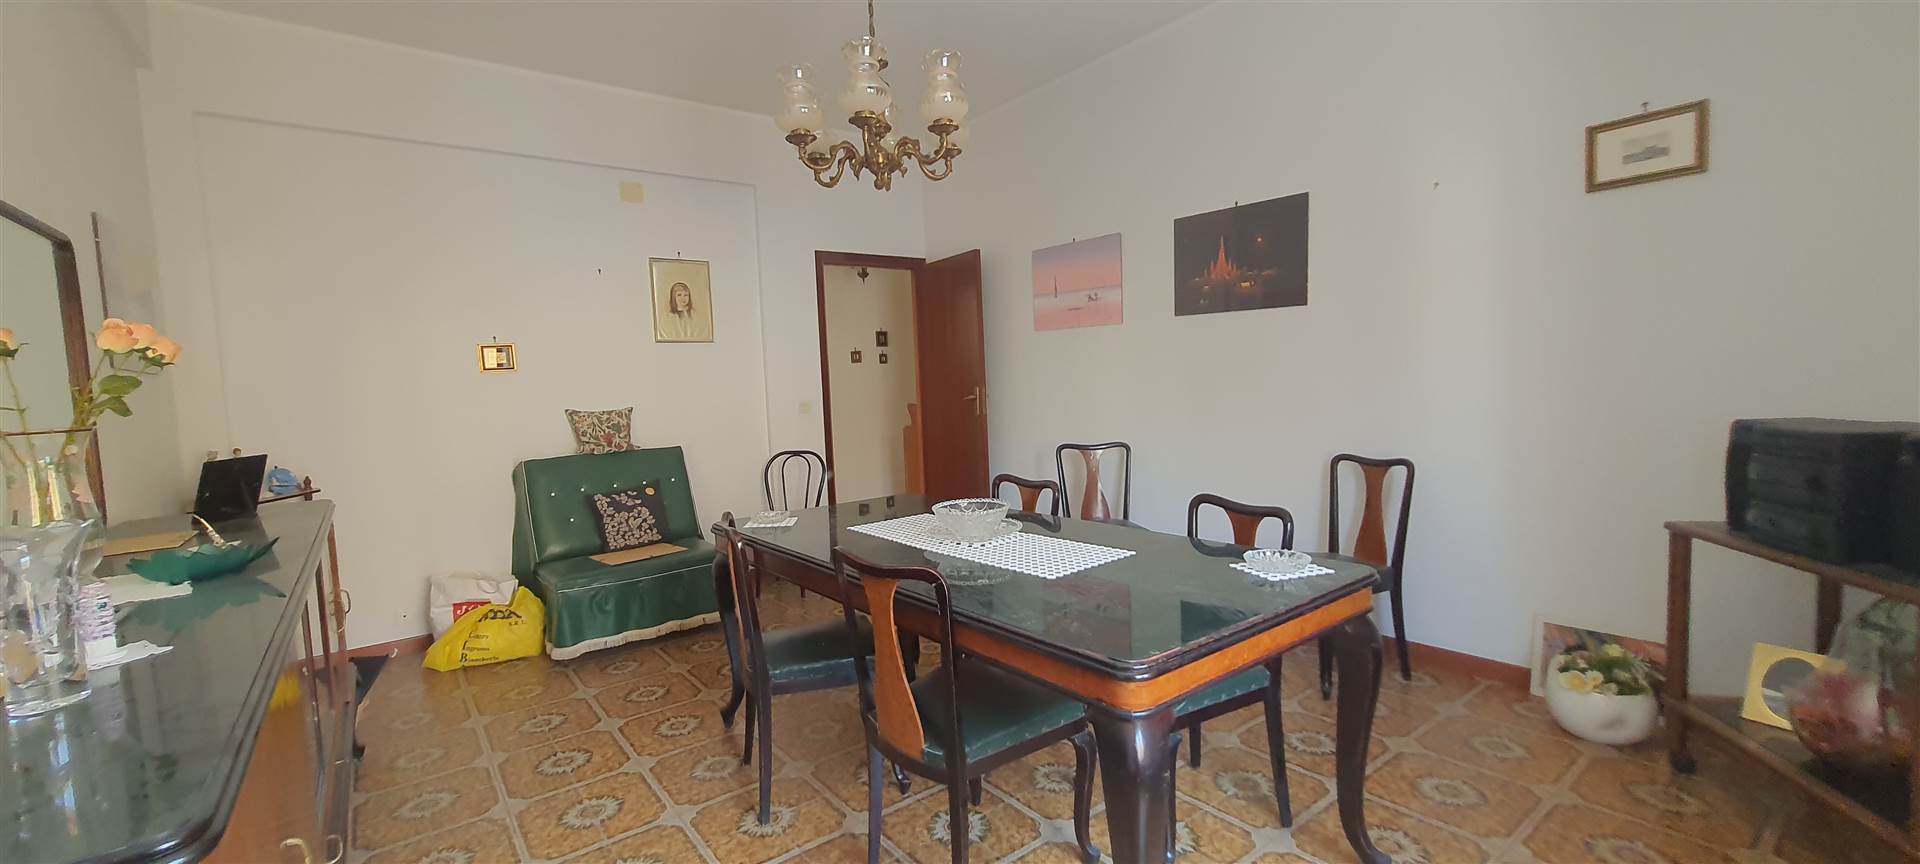 CENTRO STORICO, TRAPANI, Palace for sale of 200 Sq. mt., Be restored, Heating Non-existent, composed by: 12 Rooms, Separate kitchen, , 4 Bedrooms, 2 